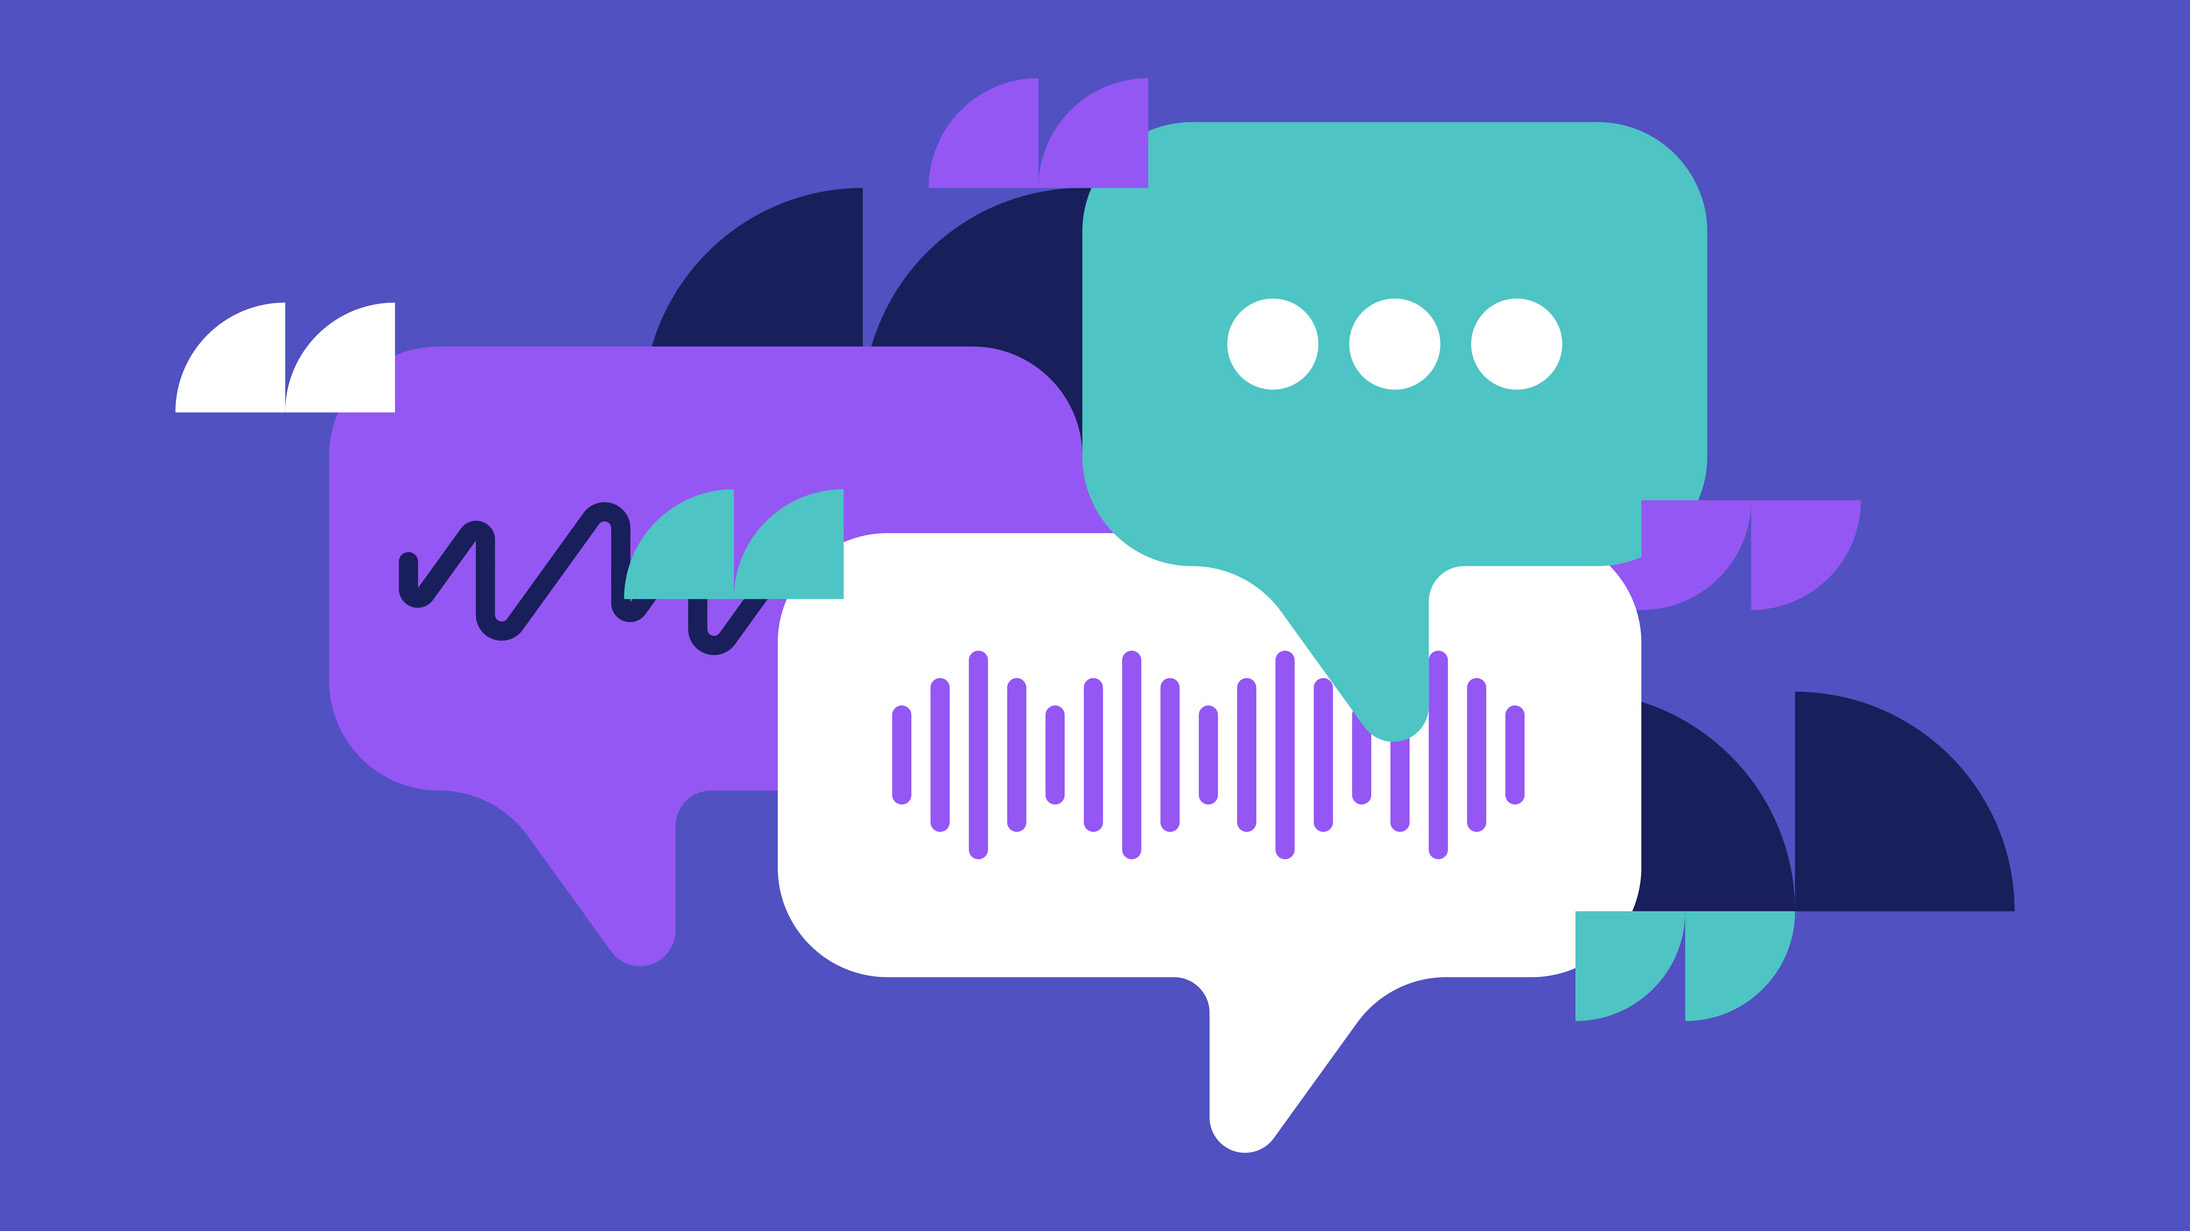 A cartoon graphic of multiple speech bubbles and quote marks overlapping each other, to represent AI copilots and chatbots. Decorative: the graphics are in white, purple, and green against a dark blue background.